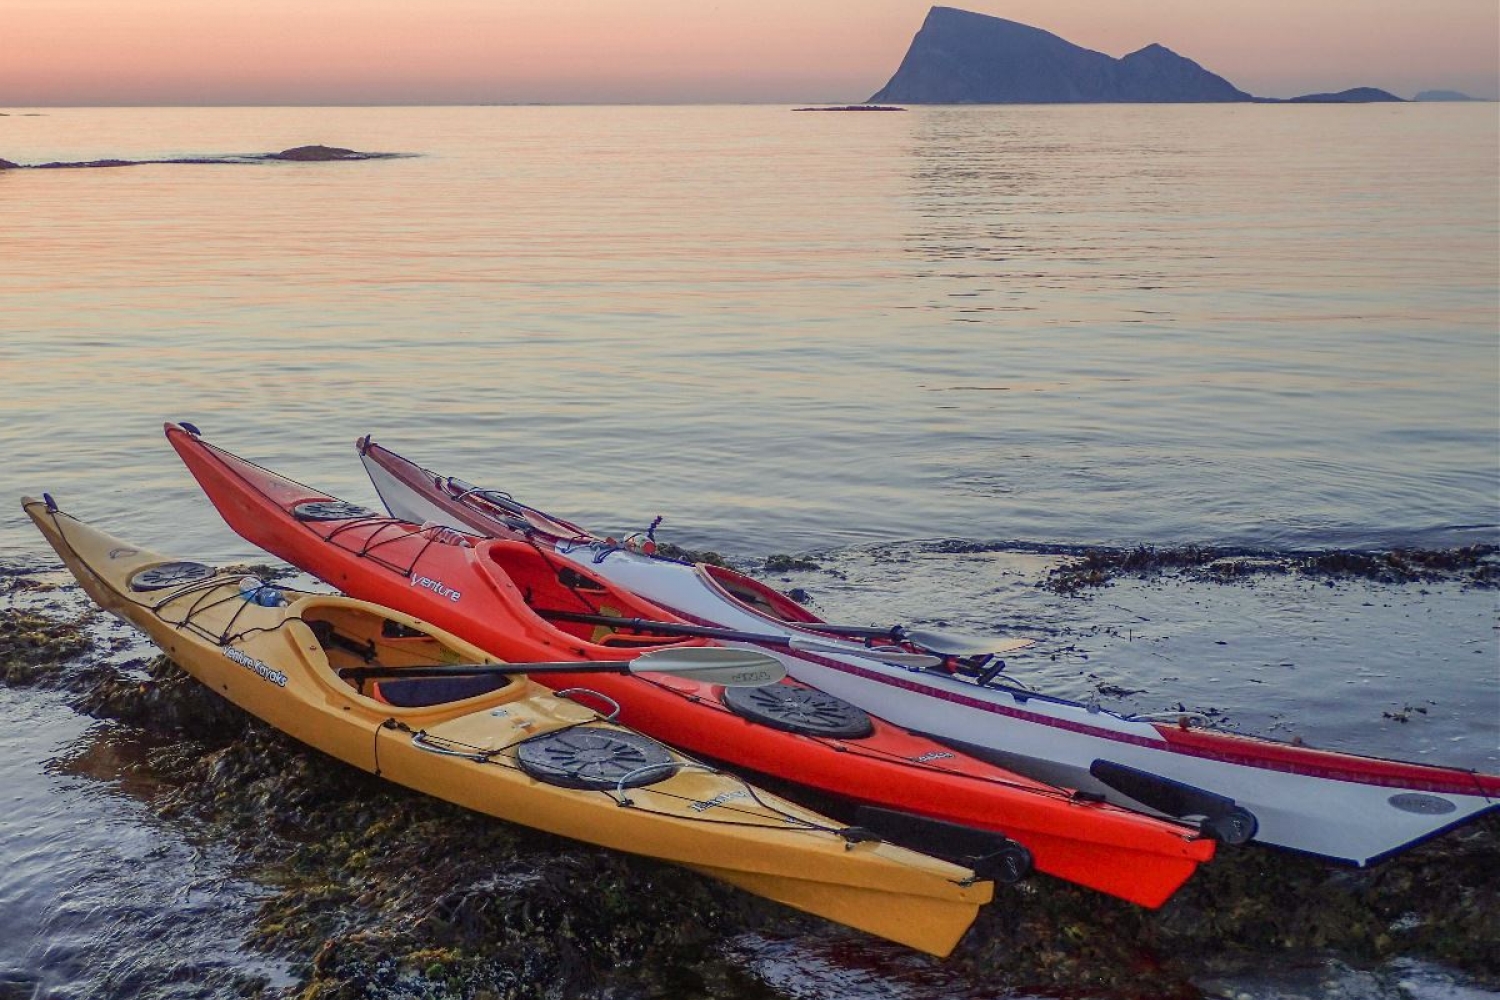 Guided Sea Kayaking in Sommarøy